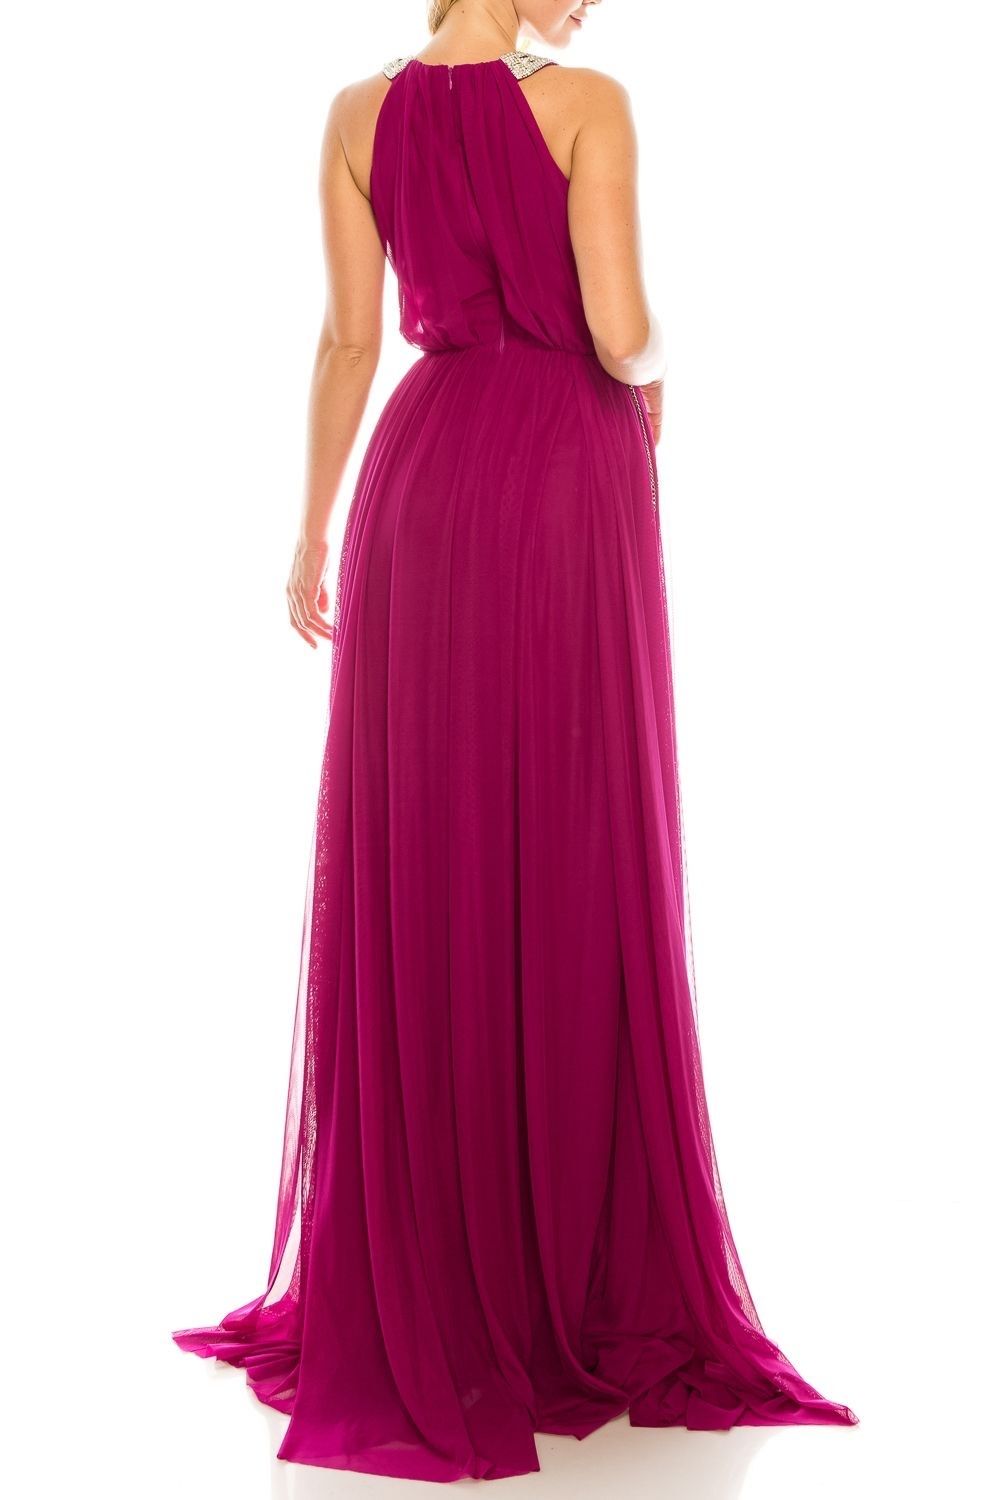 Odrella Size 6 Prom Halter Sequined Hot Pink Floor Length Maxi on Queenly